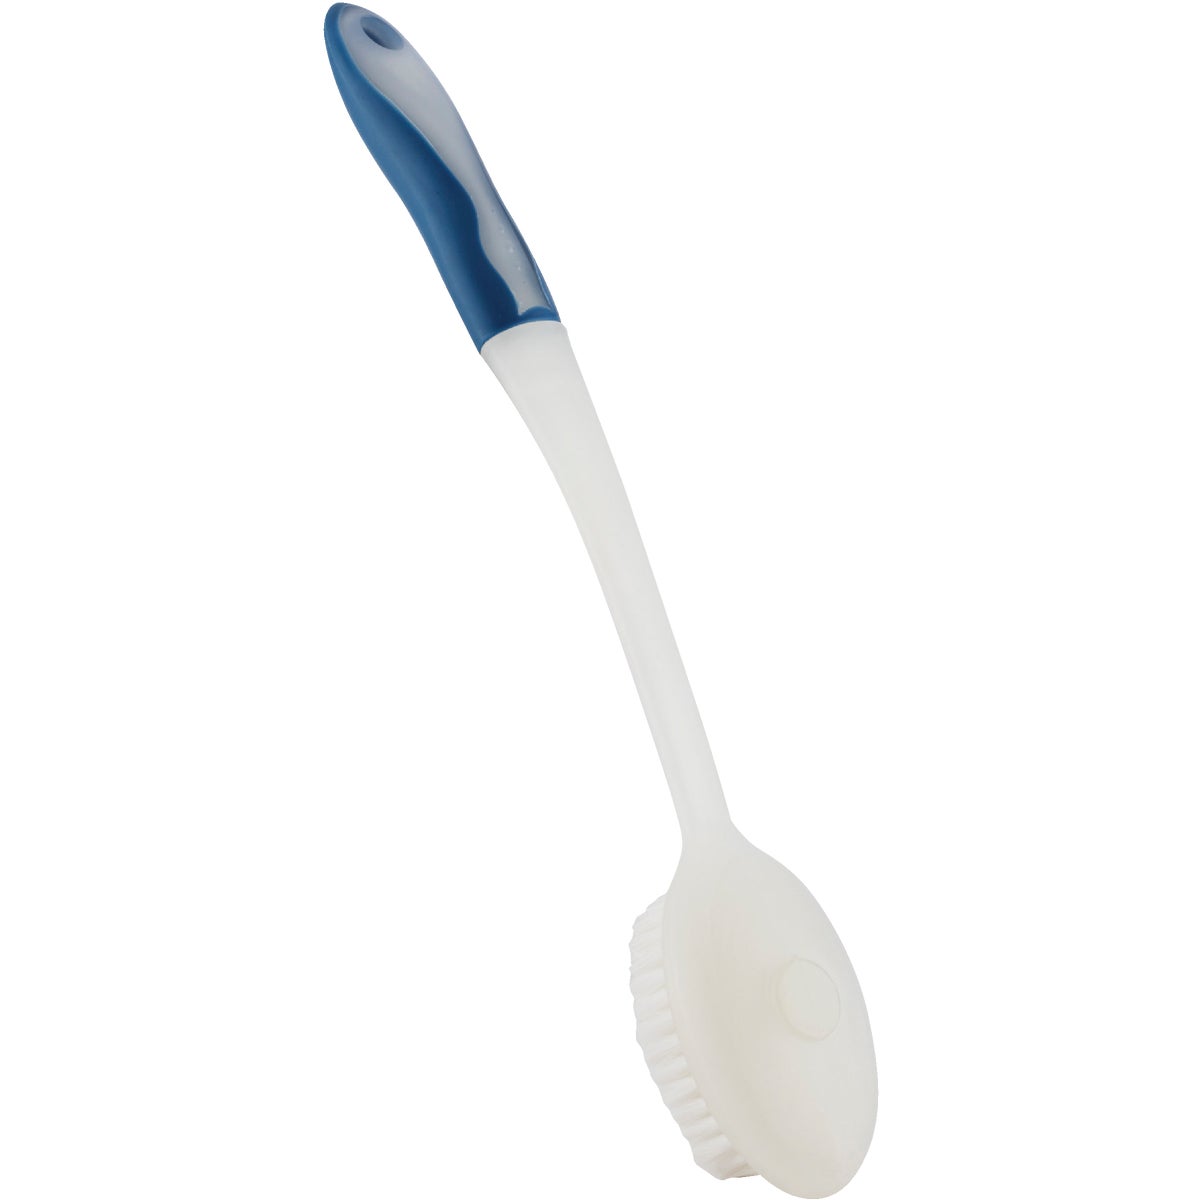 Item 600529, 16-inch bath brush has a 10-3/4-inch long TPE handle with soft 